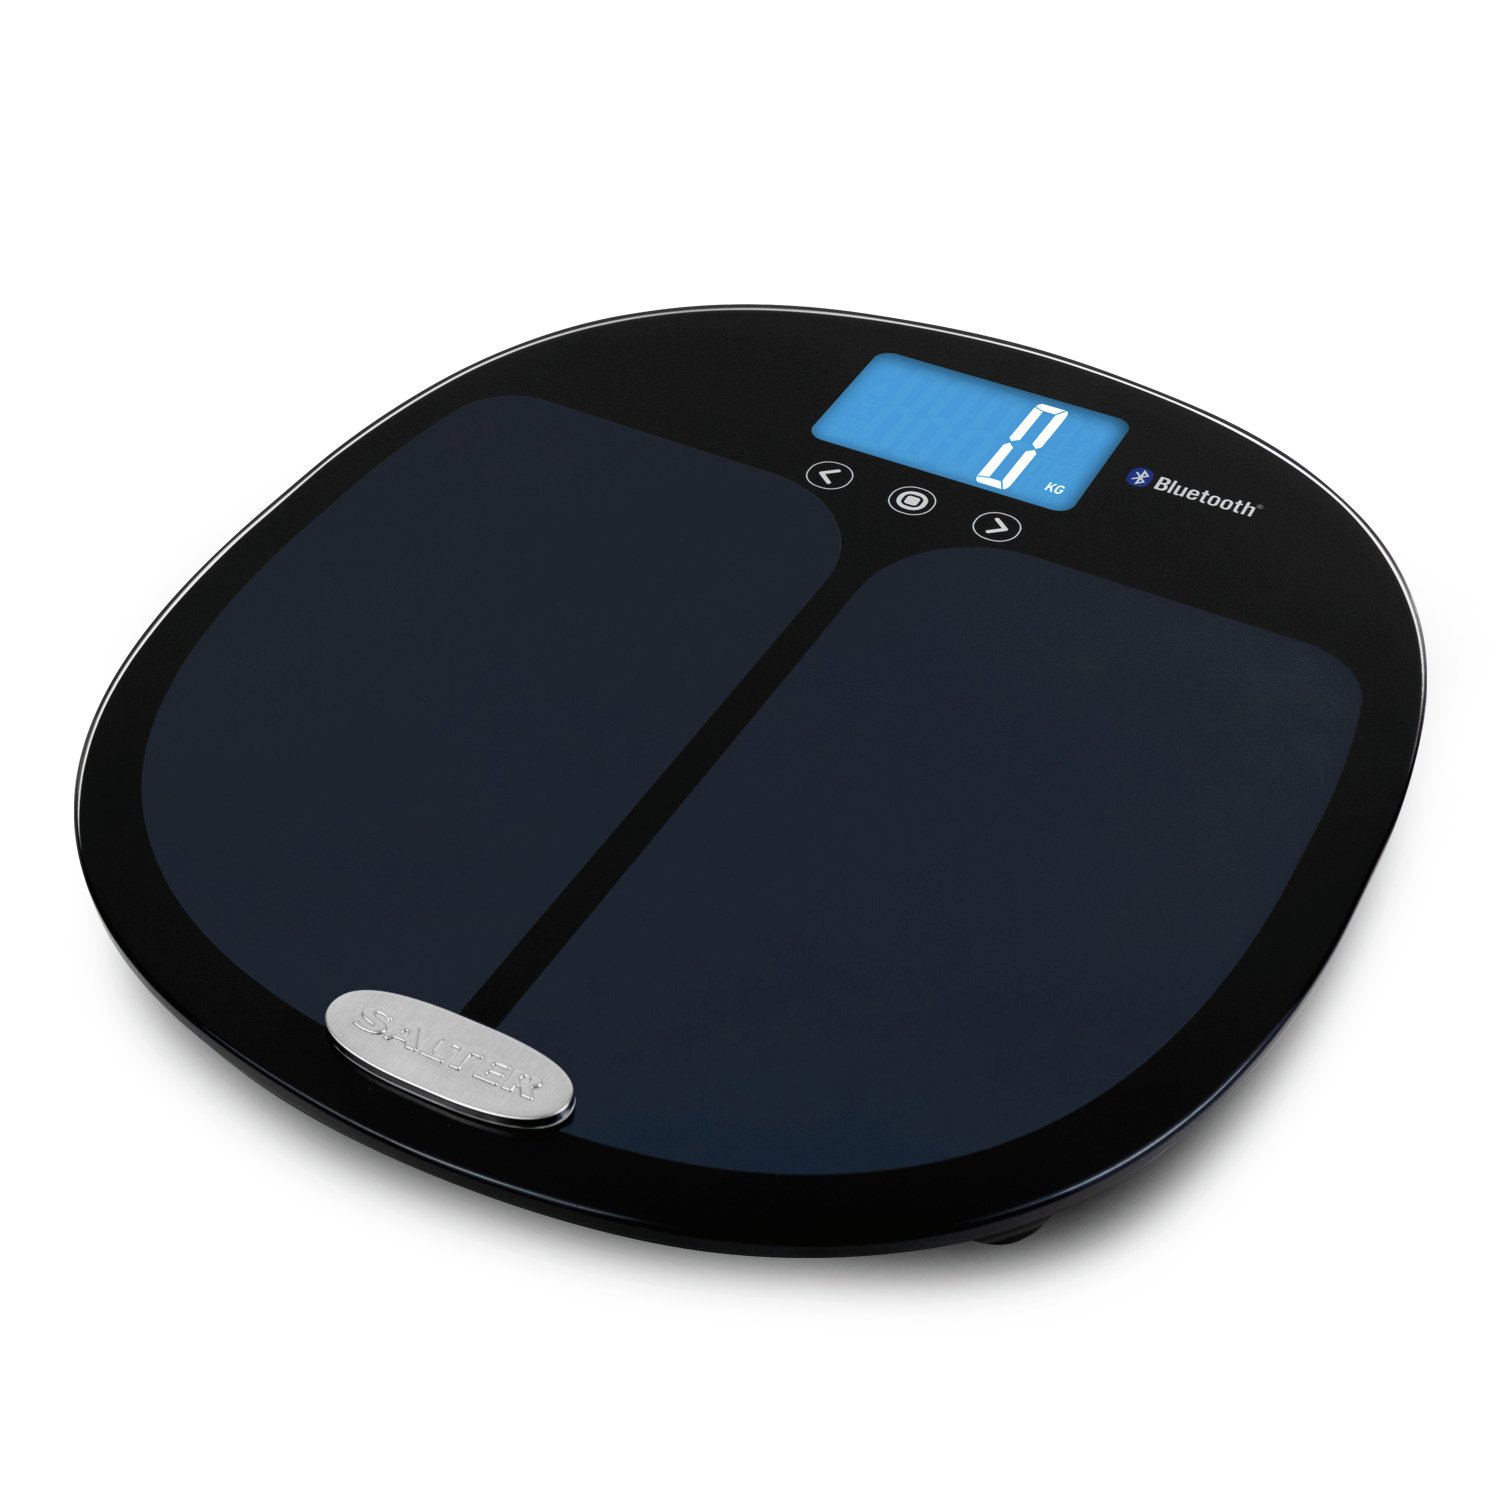 Salter Bluetooth Smart Analyser Bathroom Scale Review